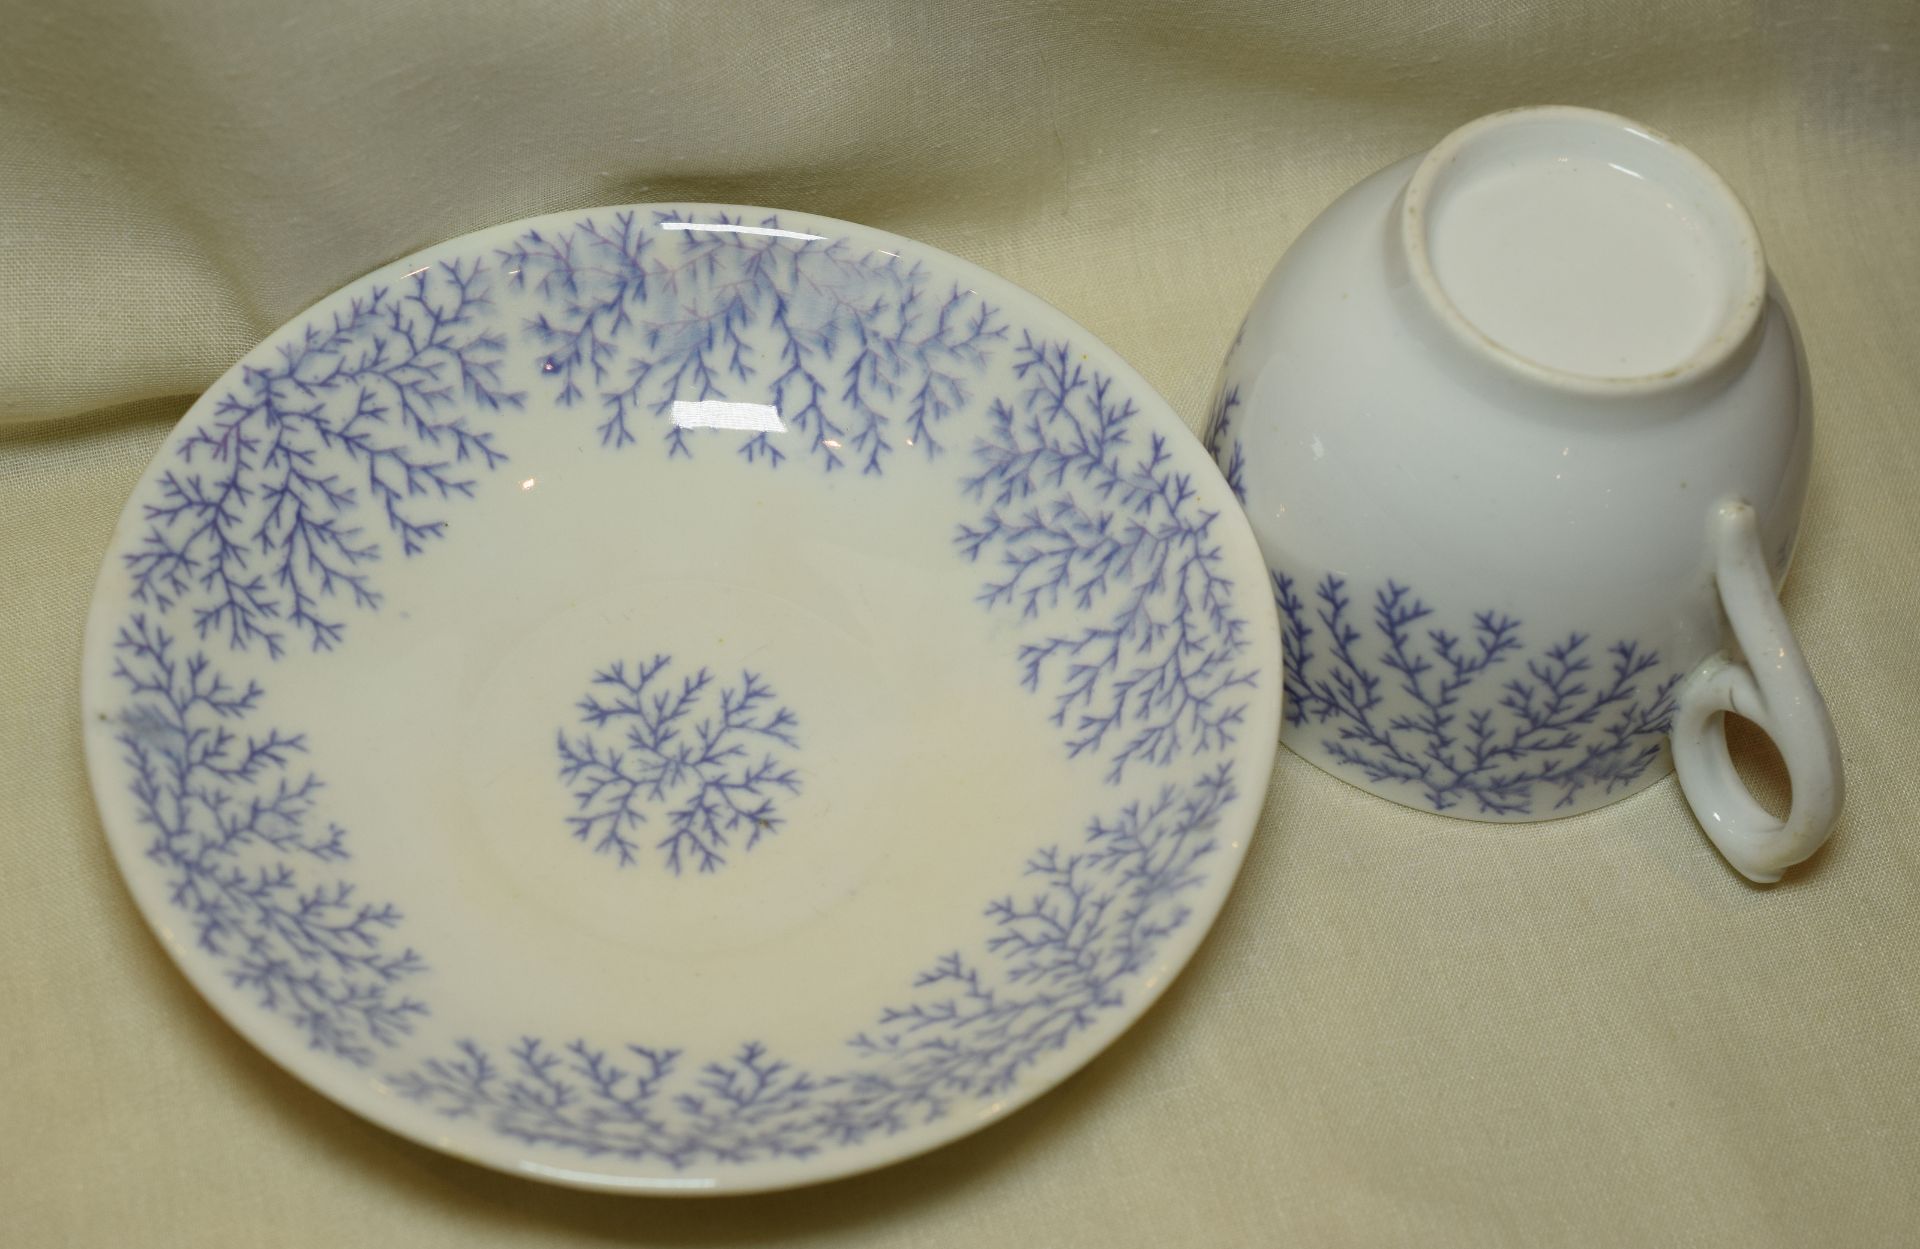 Swansea Blue And White Sprig Design Translucent Cup And Saucer c1850s - Image 3 of 6